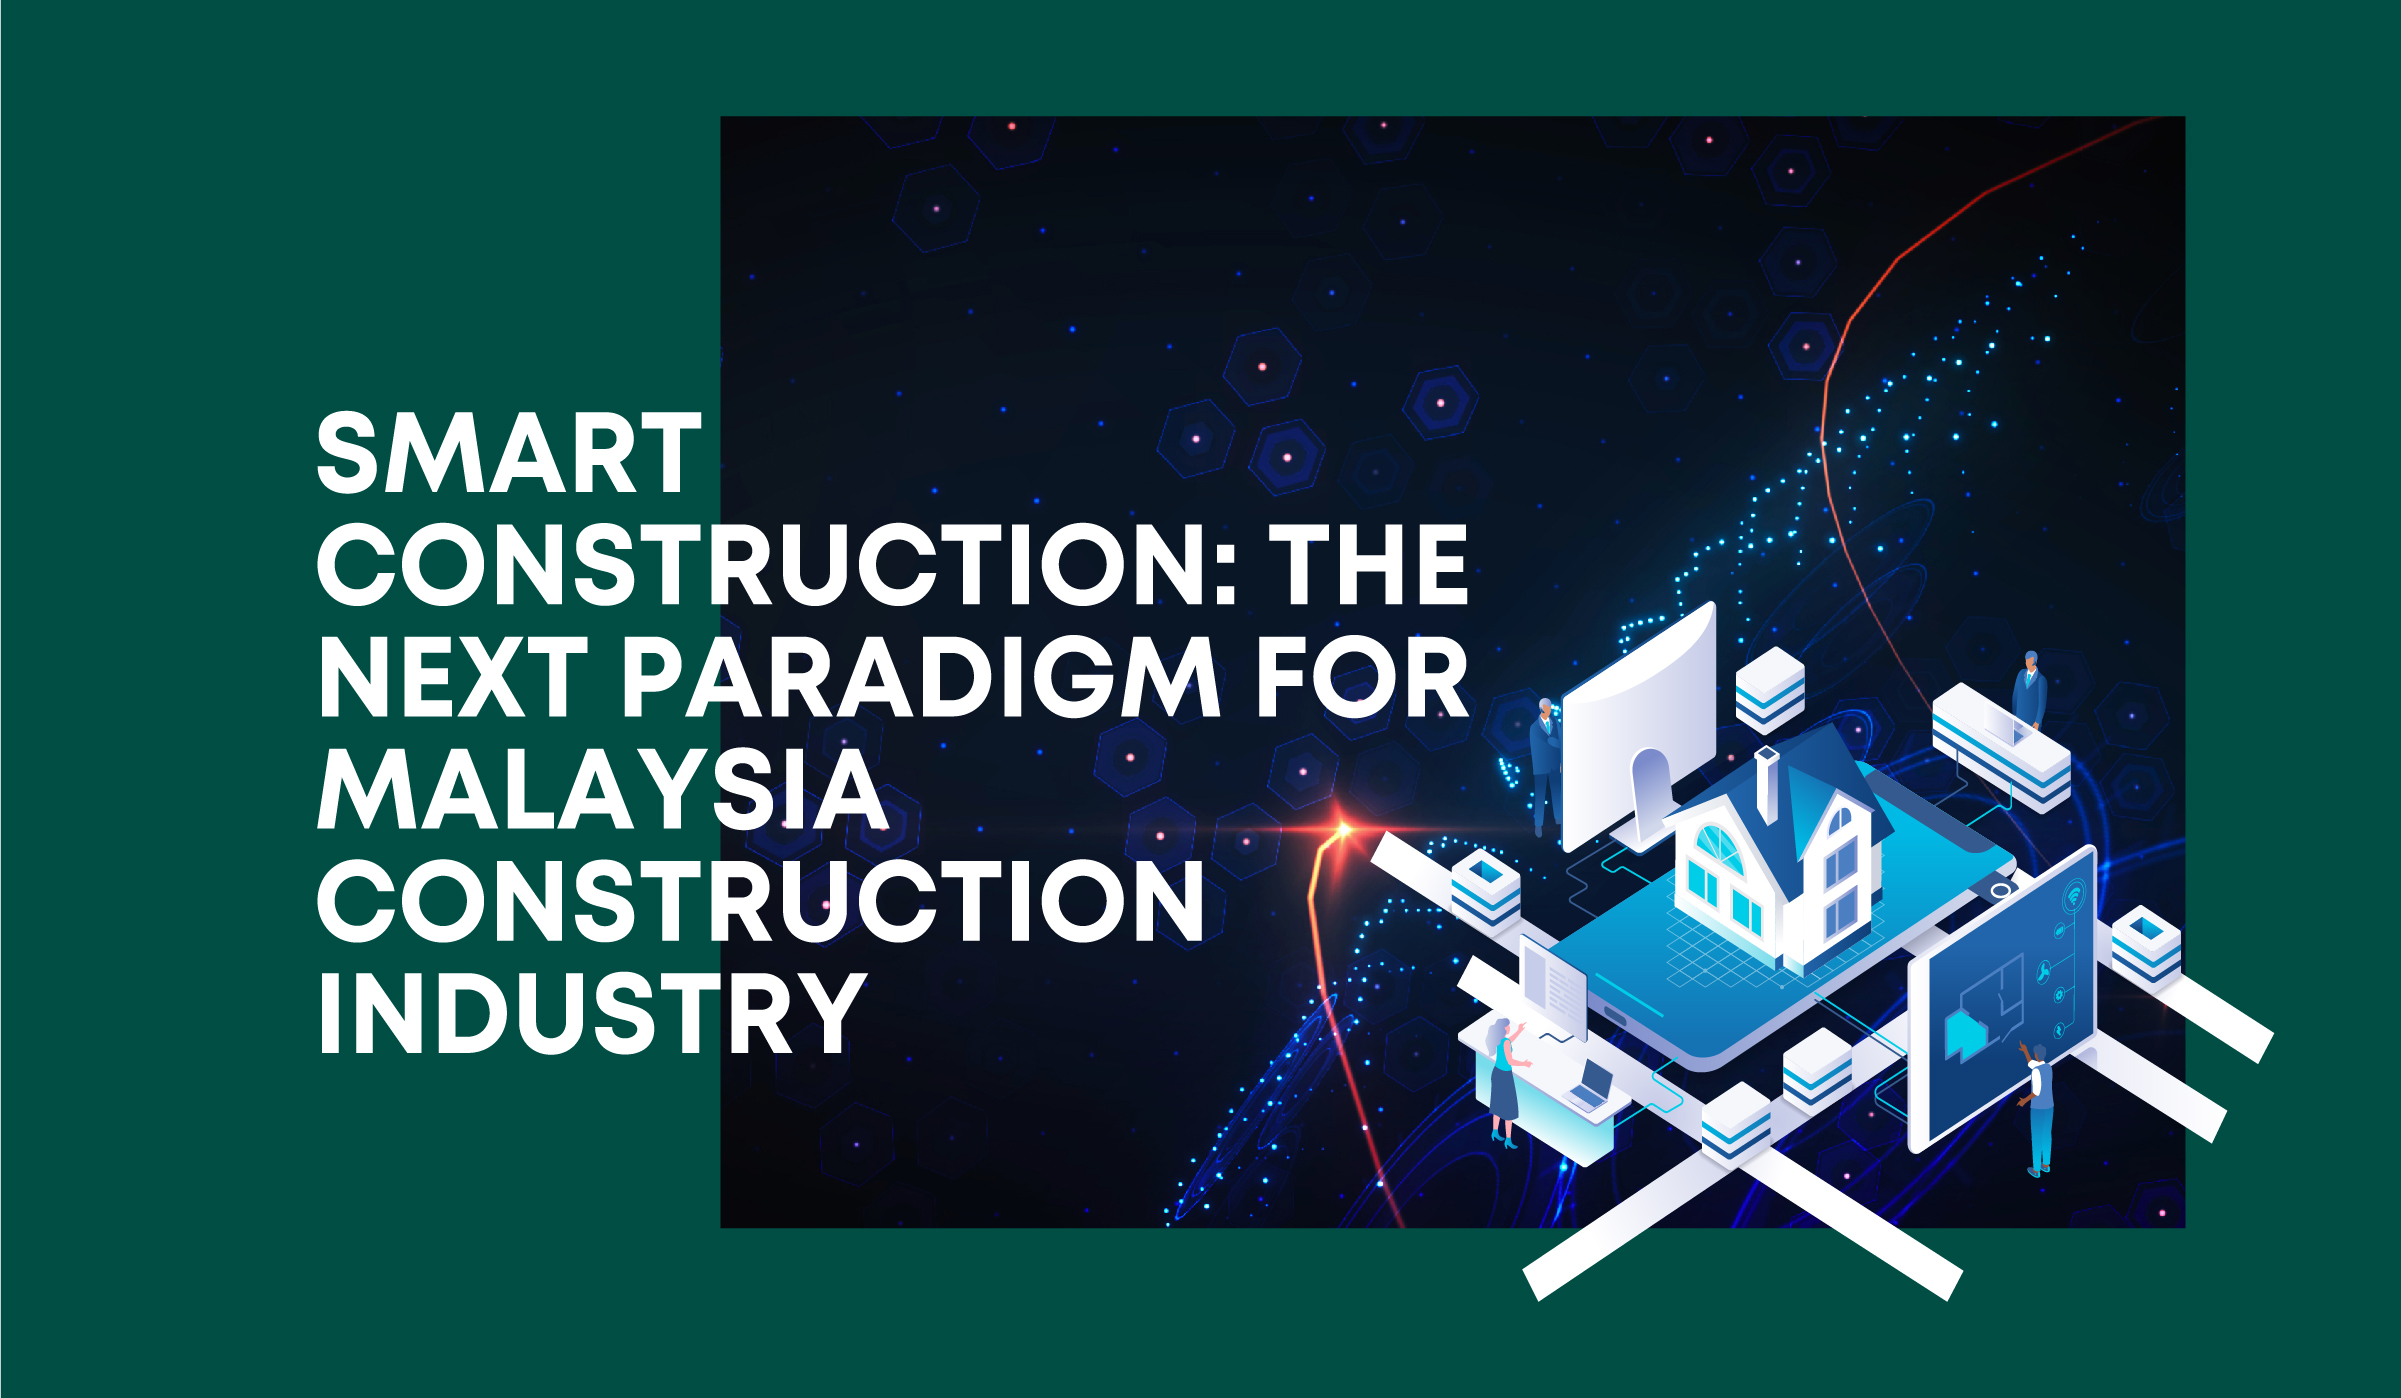 SMART CONSTRUCTION: THE NEXT PARADIGM FOR MALAYSIA CONSTRUCTION INDUSTRY